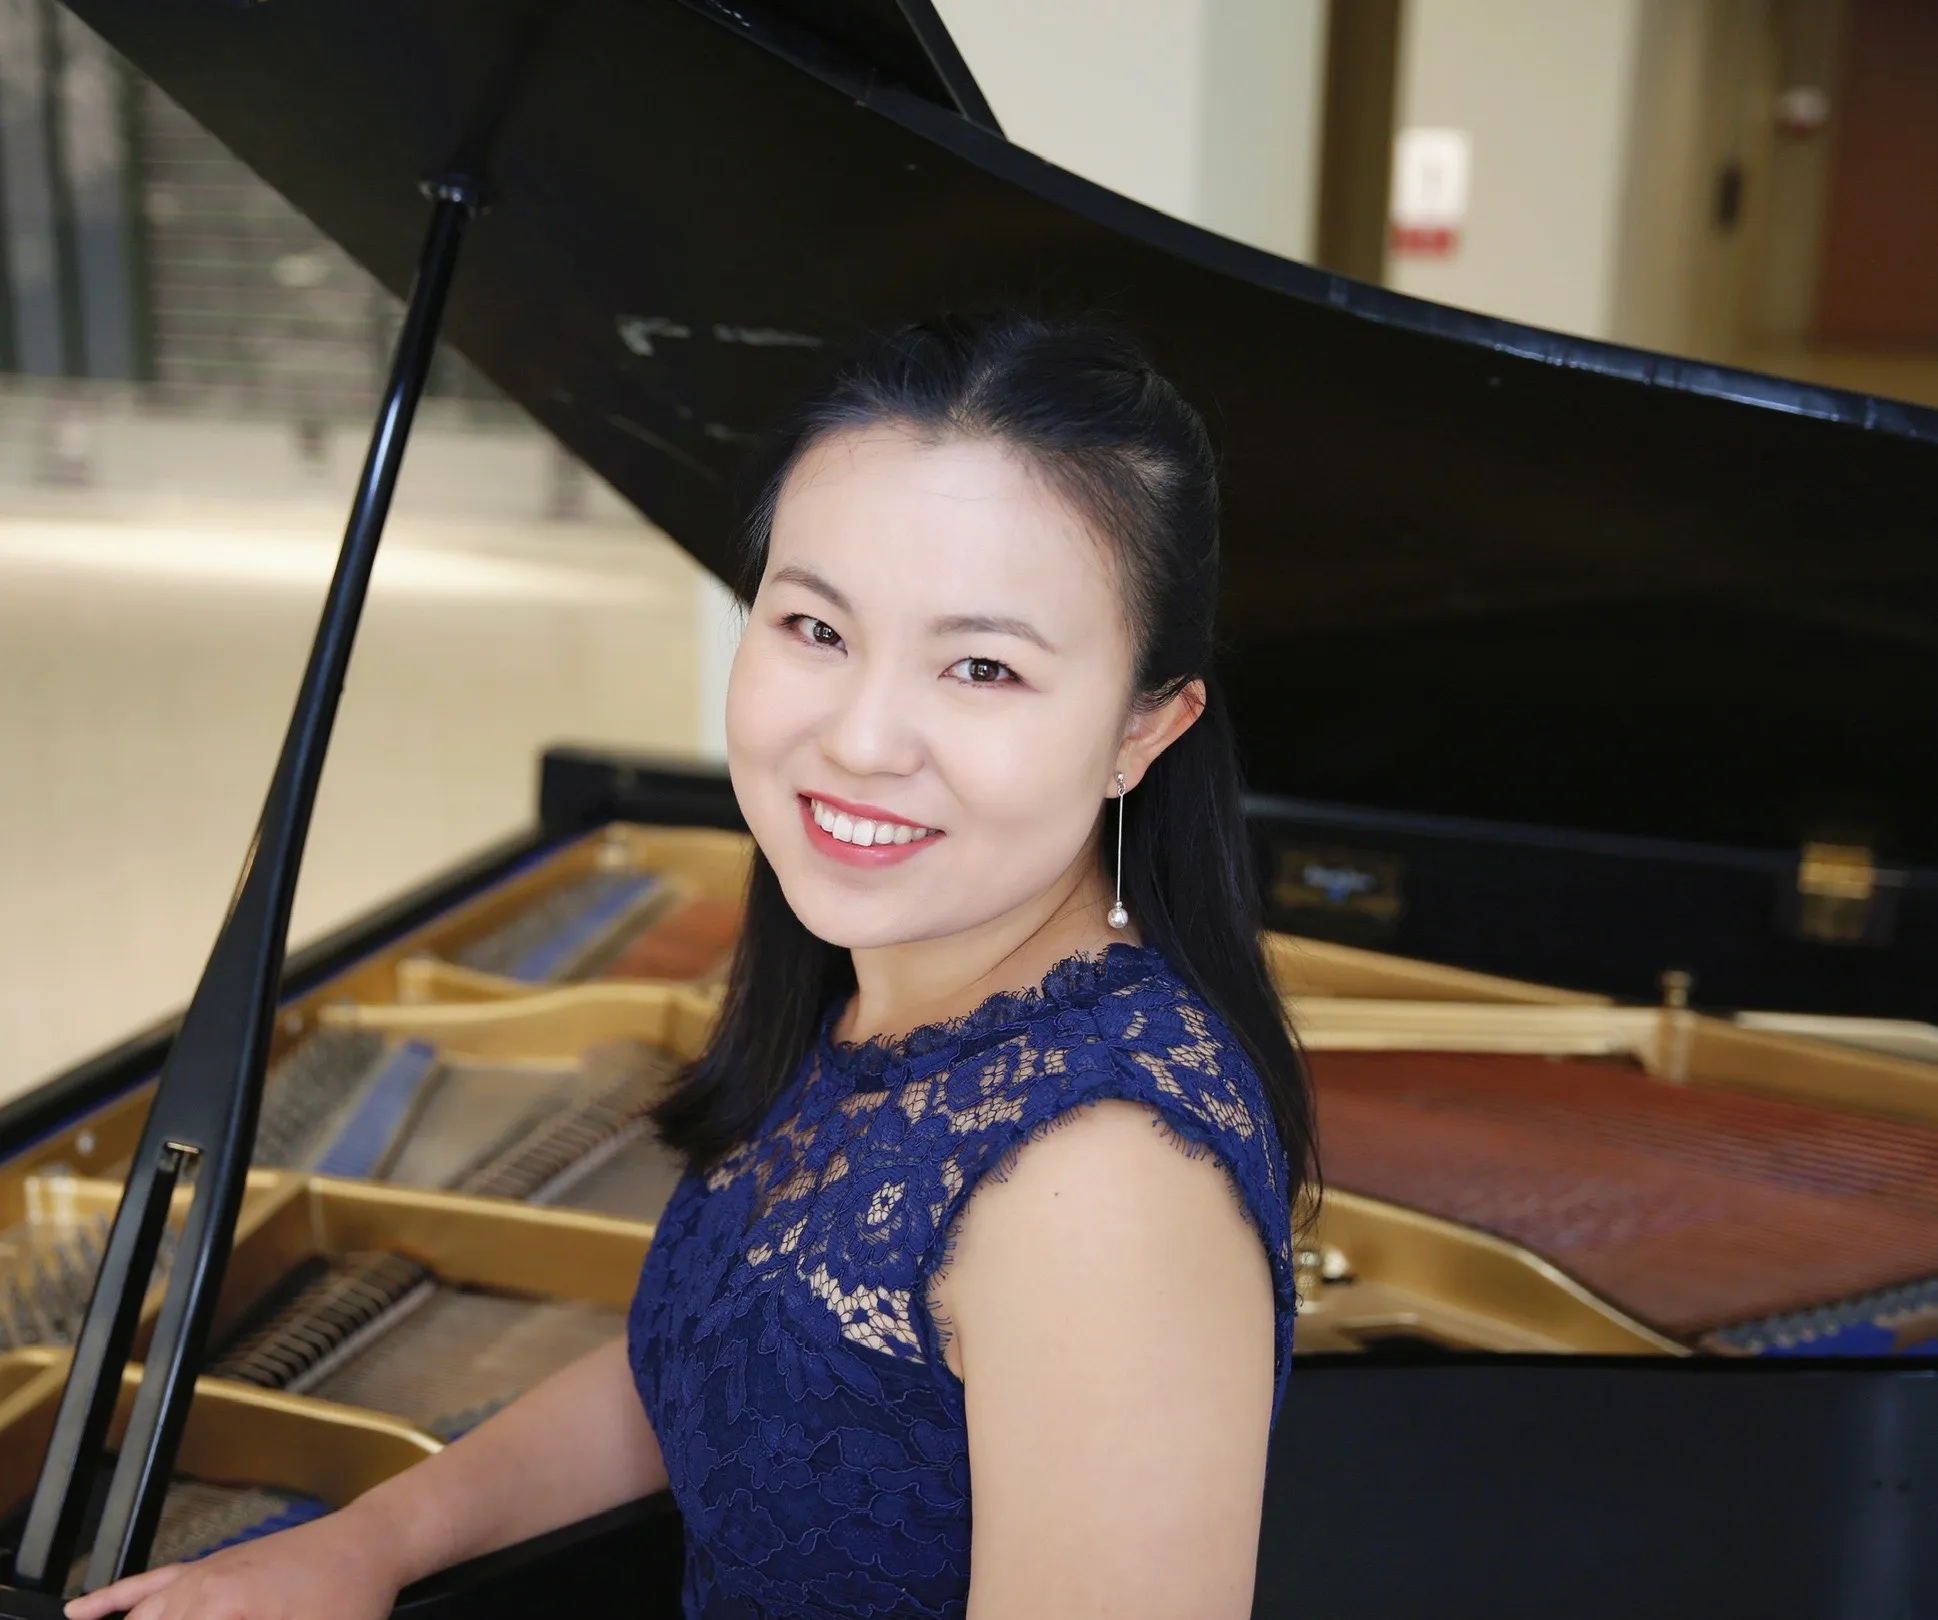 Hongling Liang stands in front of a piano wearing a navy blue dress